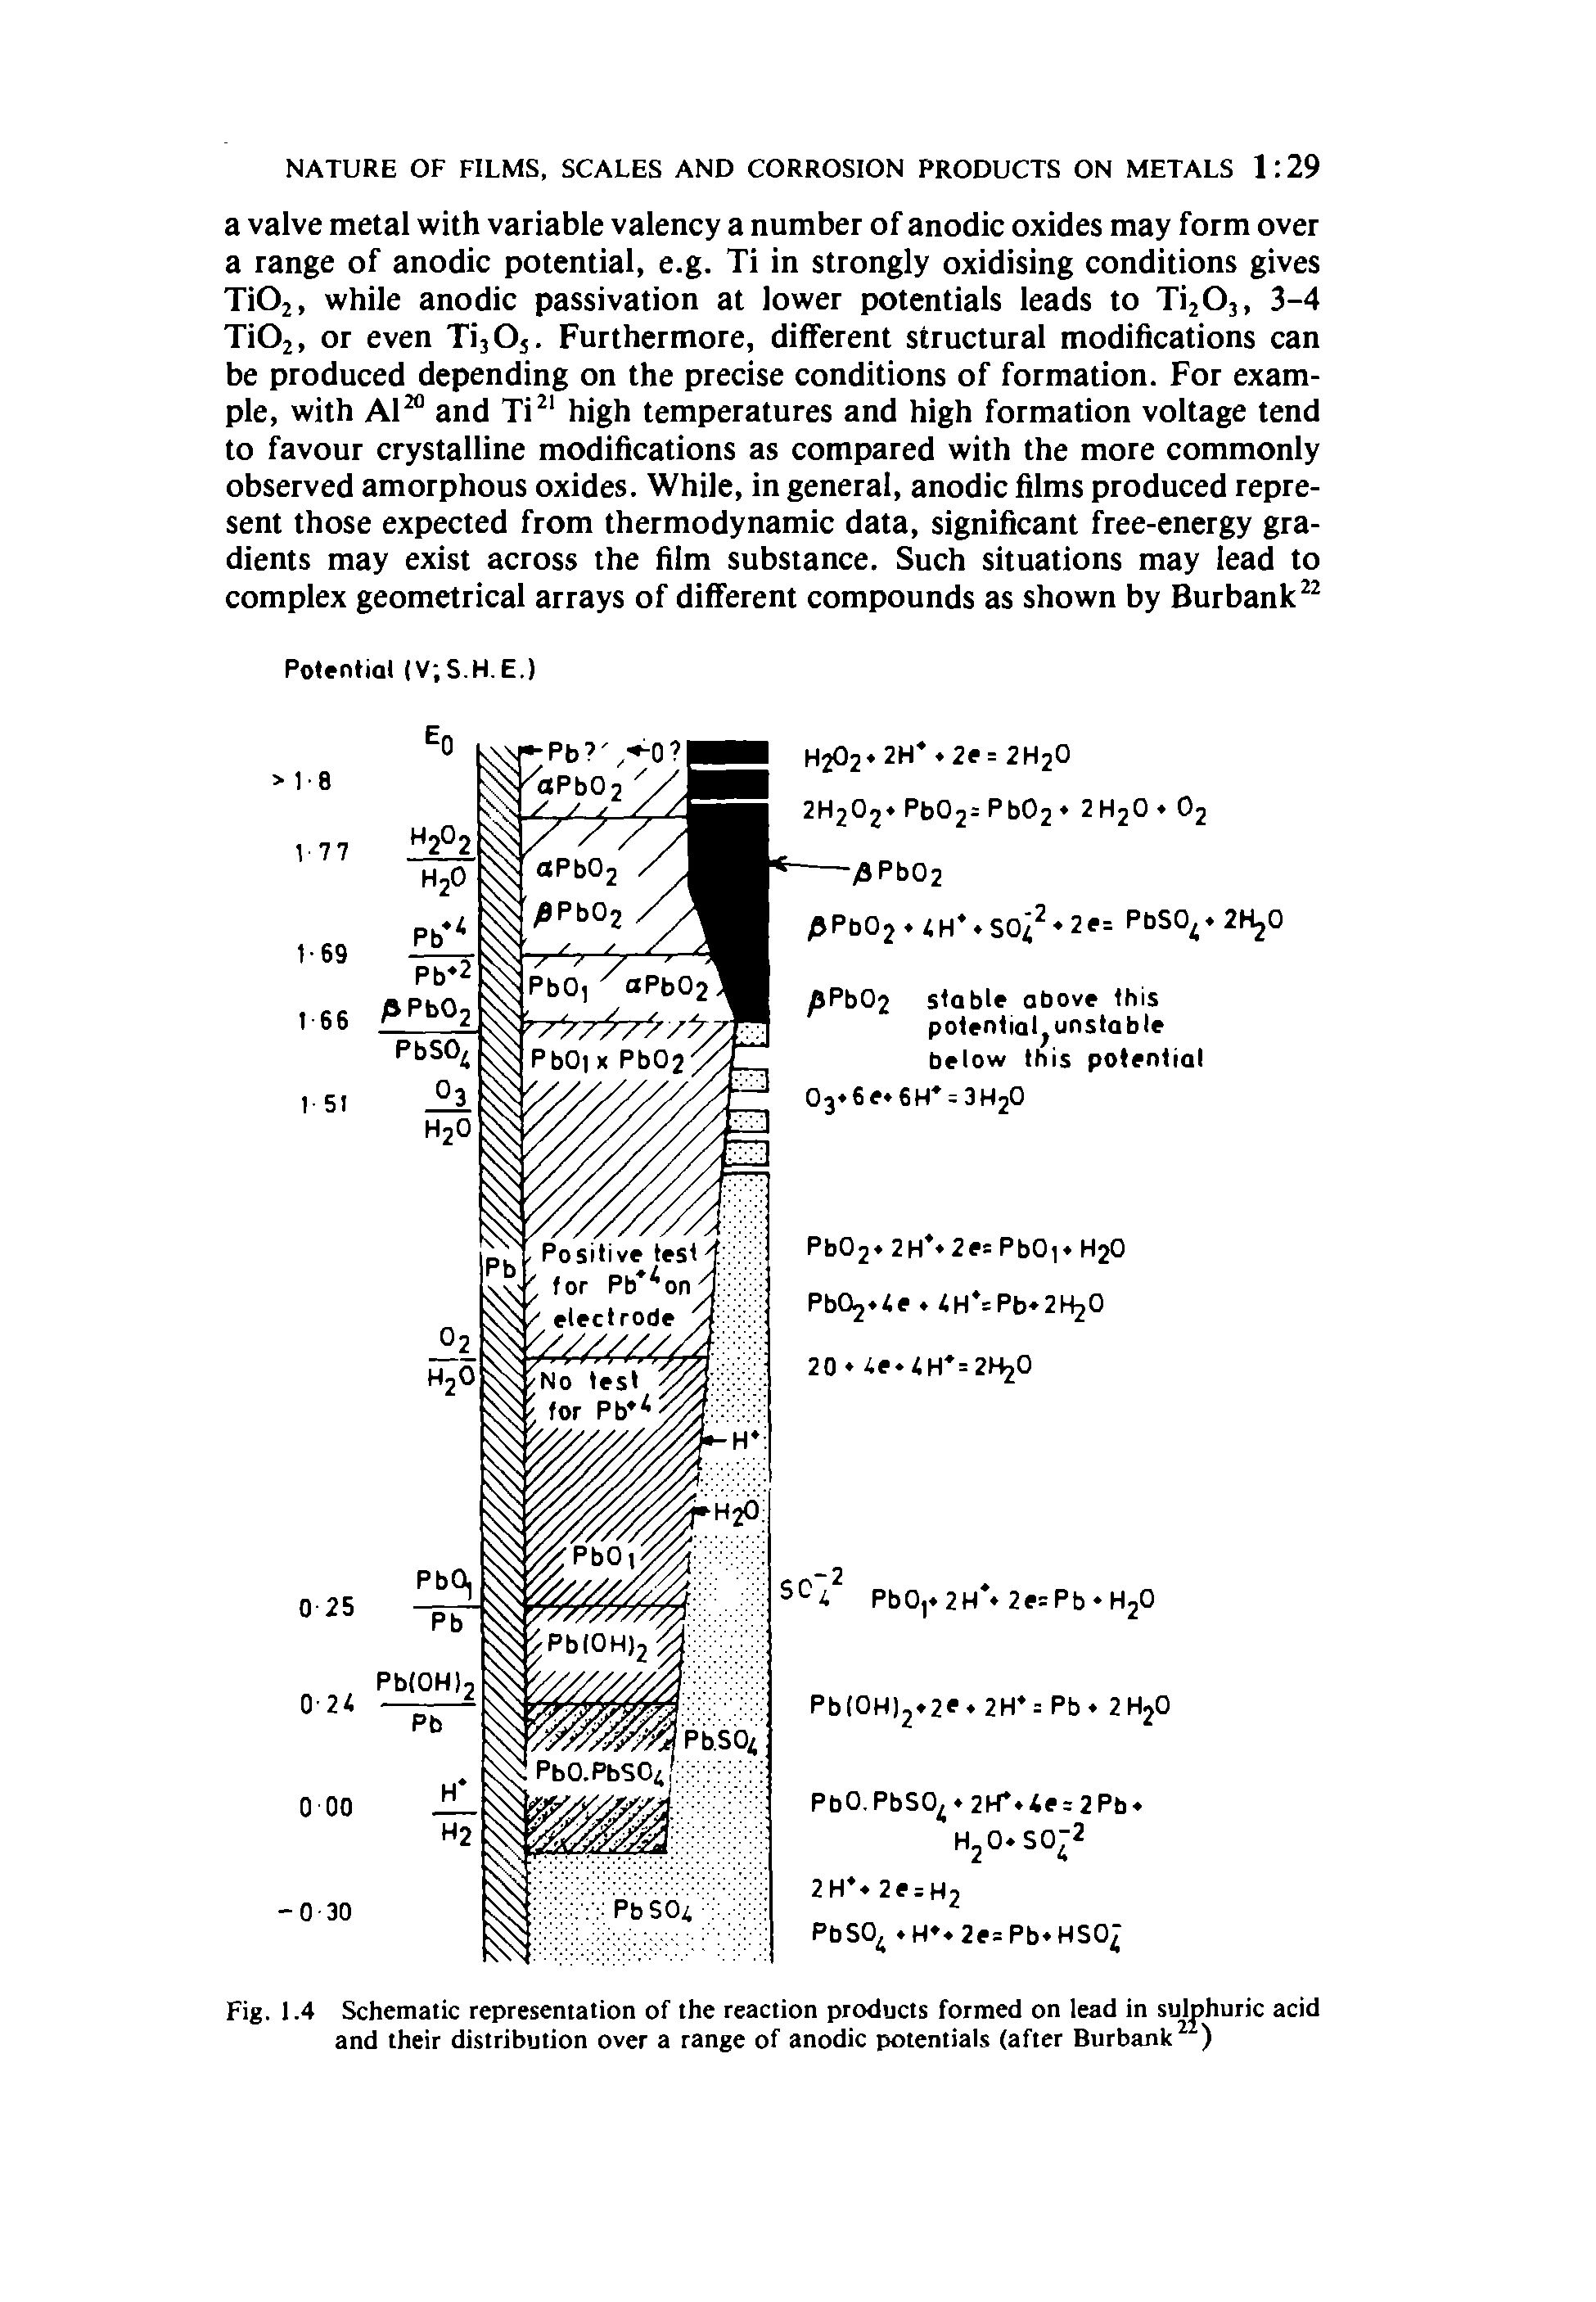 Fig. 1.4 Schematic representation of the reaction products formed on lead in sulphuric acid and their distribution over a range of anodic potentials (after Burbank...